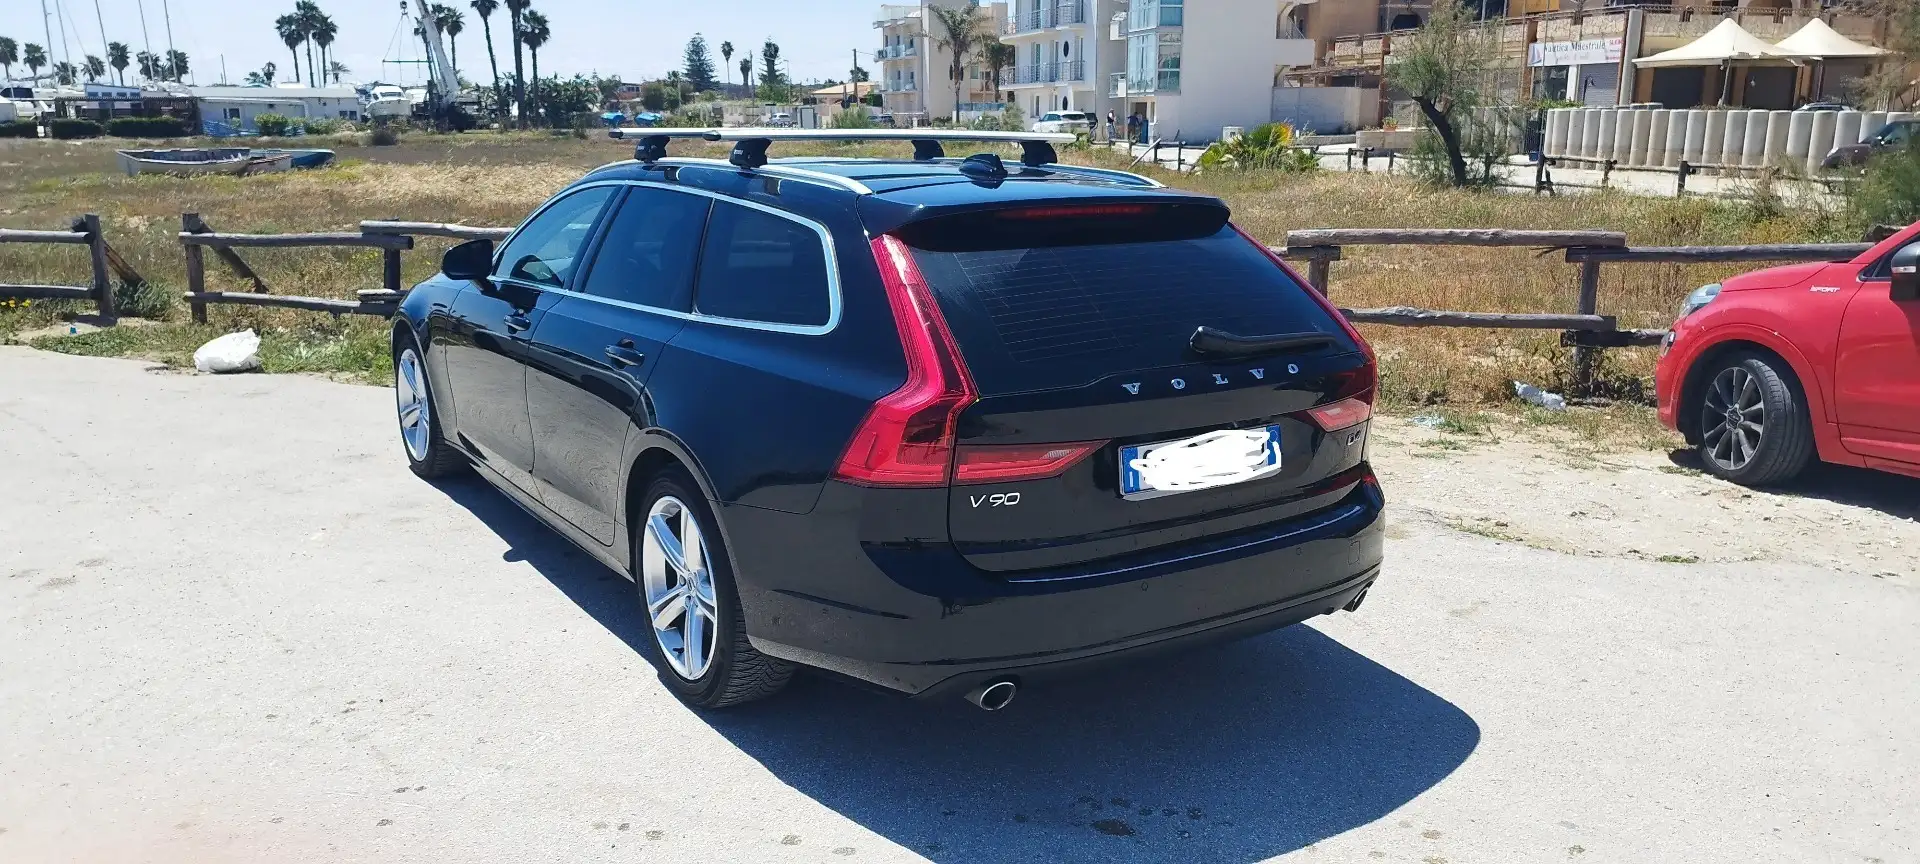 Volvo V90 2.0 d4 Business Plus geartronic my19 crna - 2